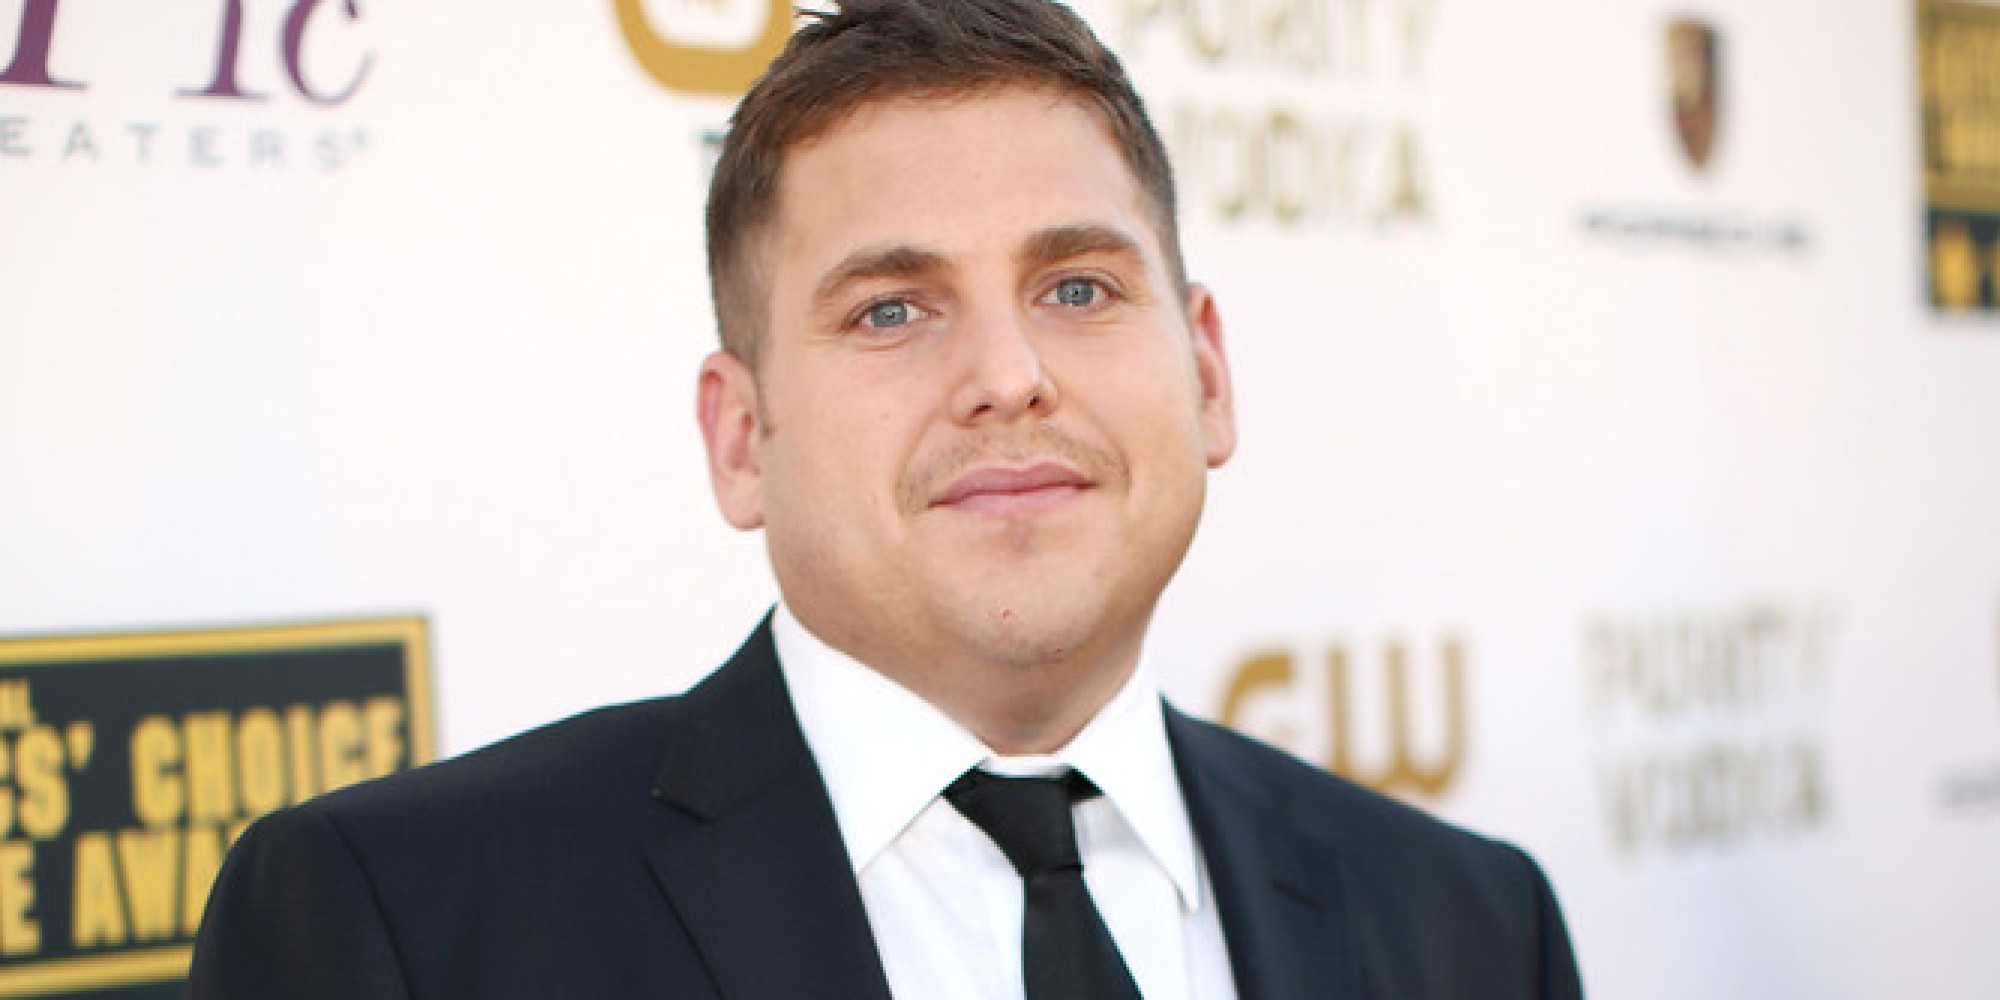 JONAH HILL Paid Paltry $60,000 For Wolf Of Wall Street